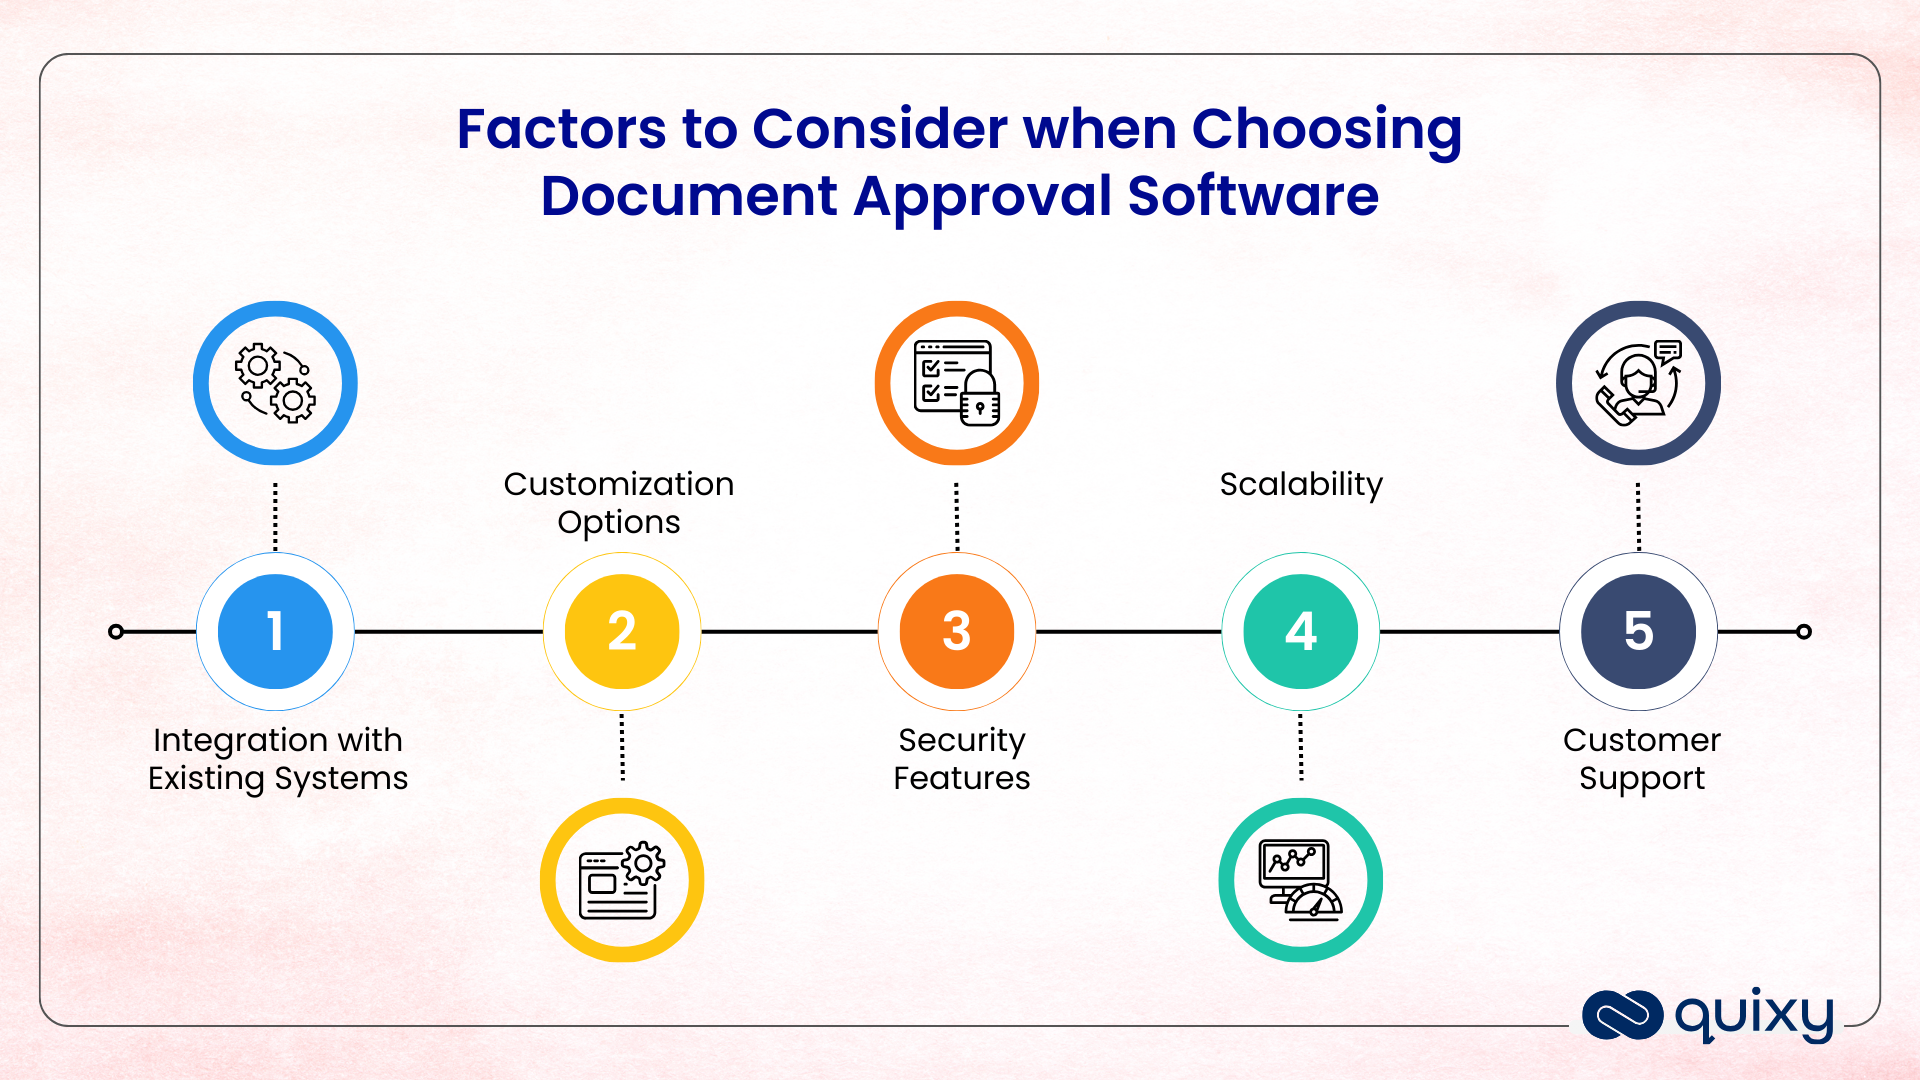 Choosing Document Approval Software